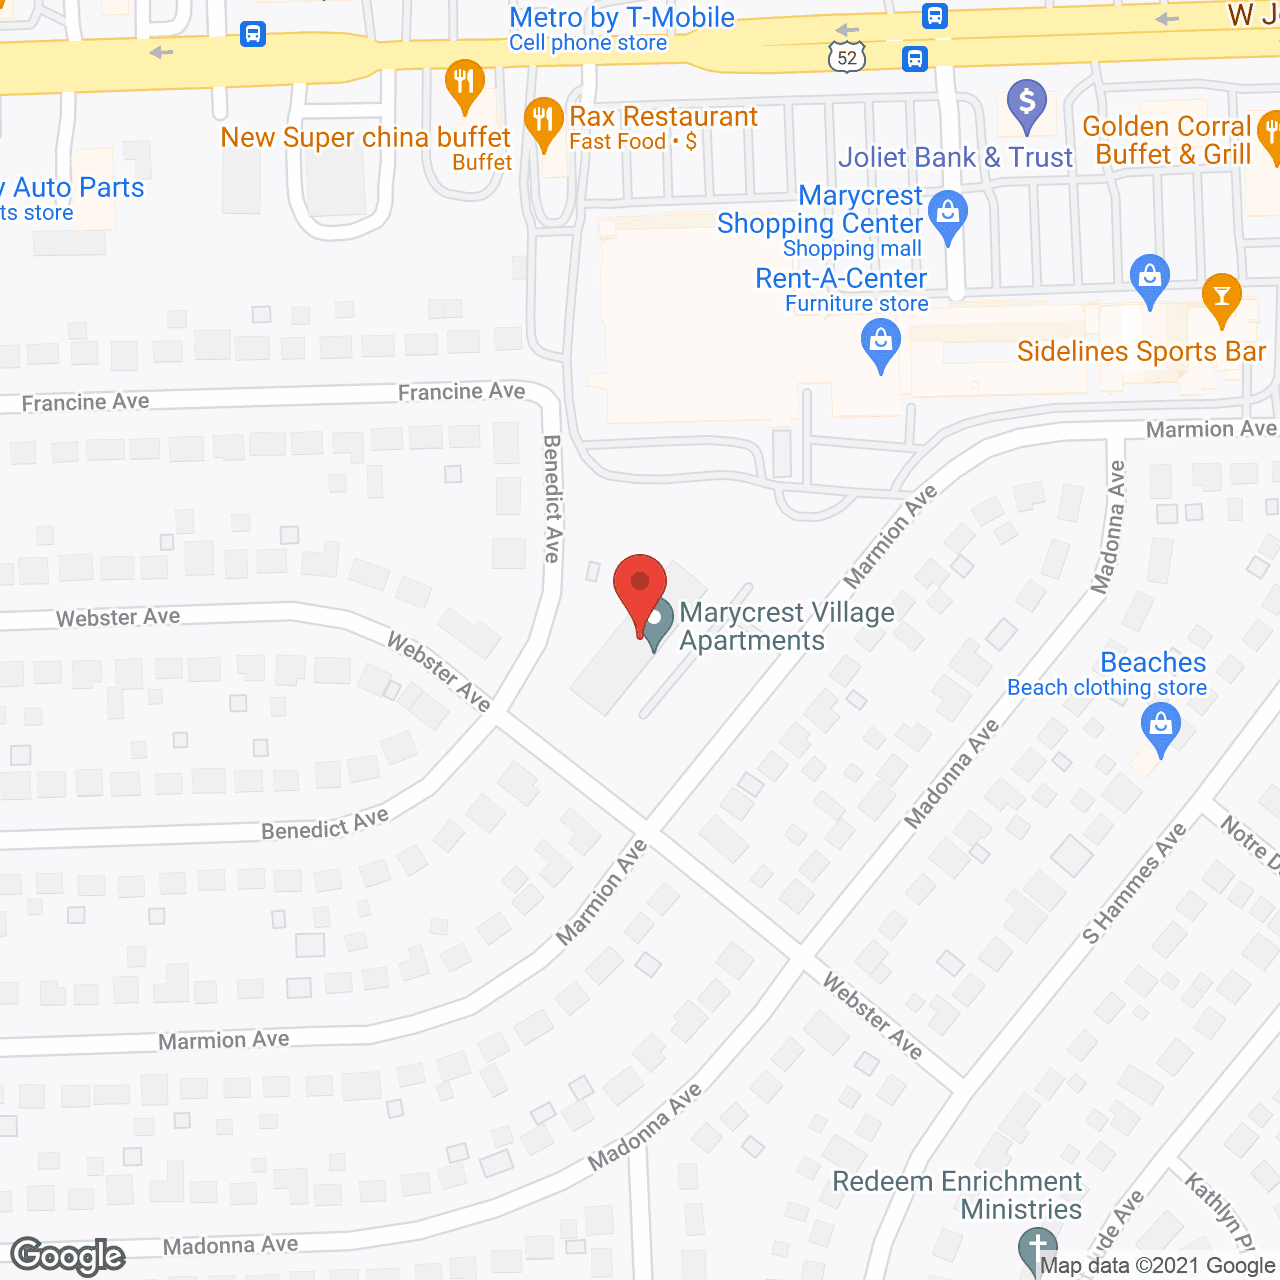 Marycrest Village Apartments in google map